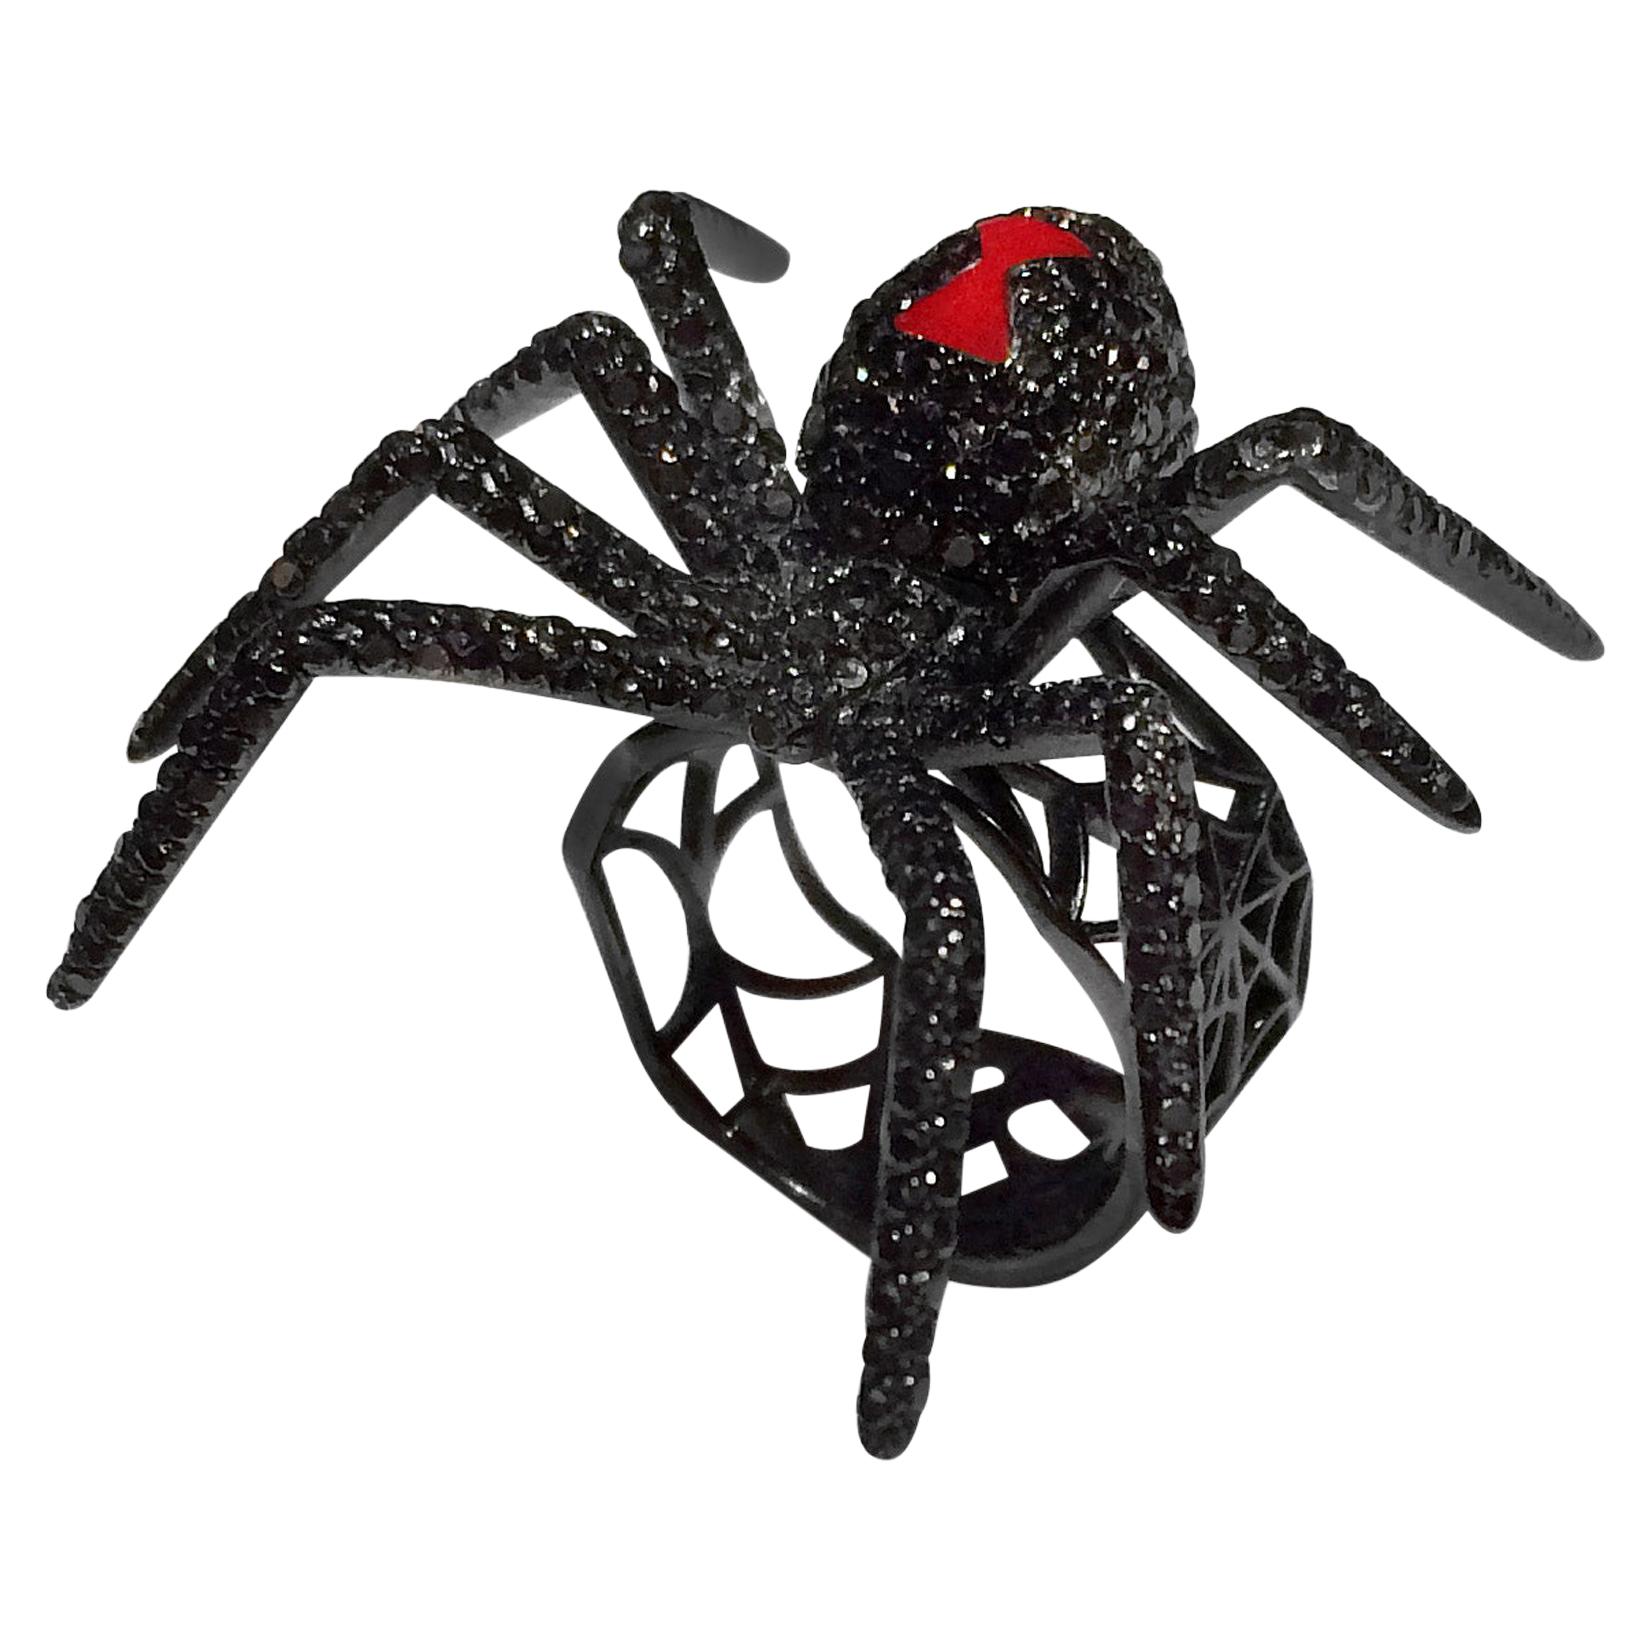 Black Diamond White Gold Cocktail Ring, the Black Widow Spider Ring For Sale